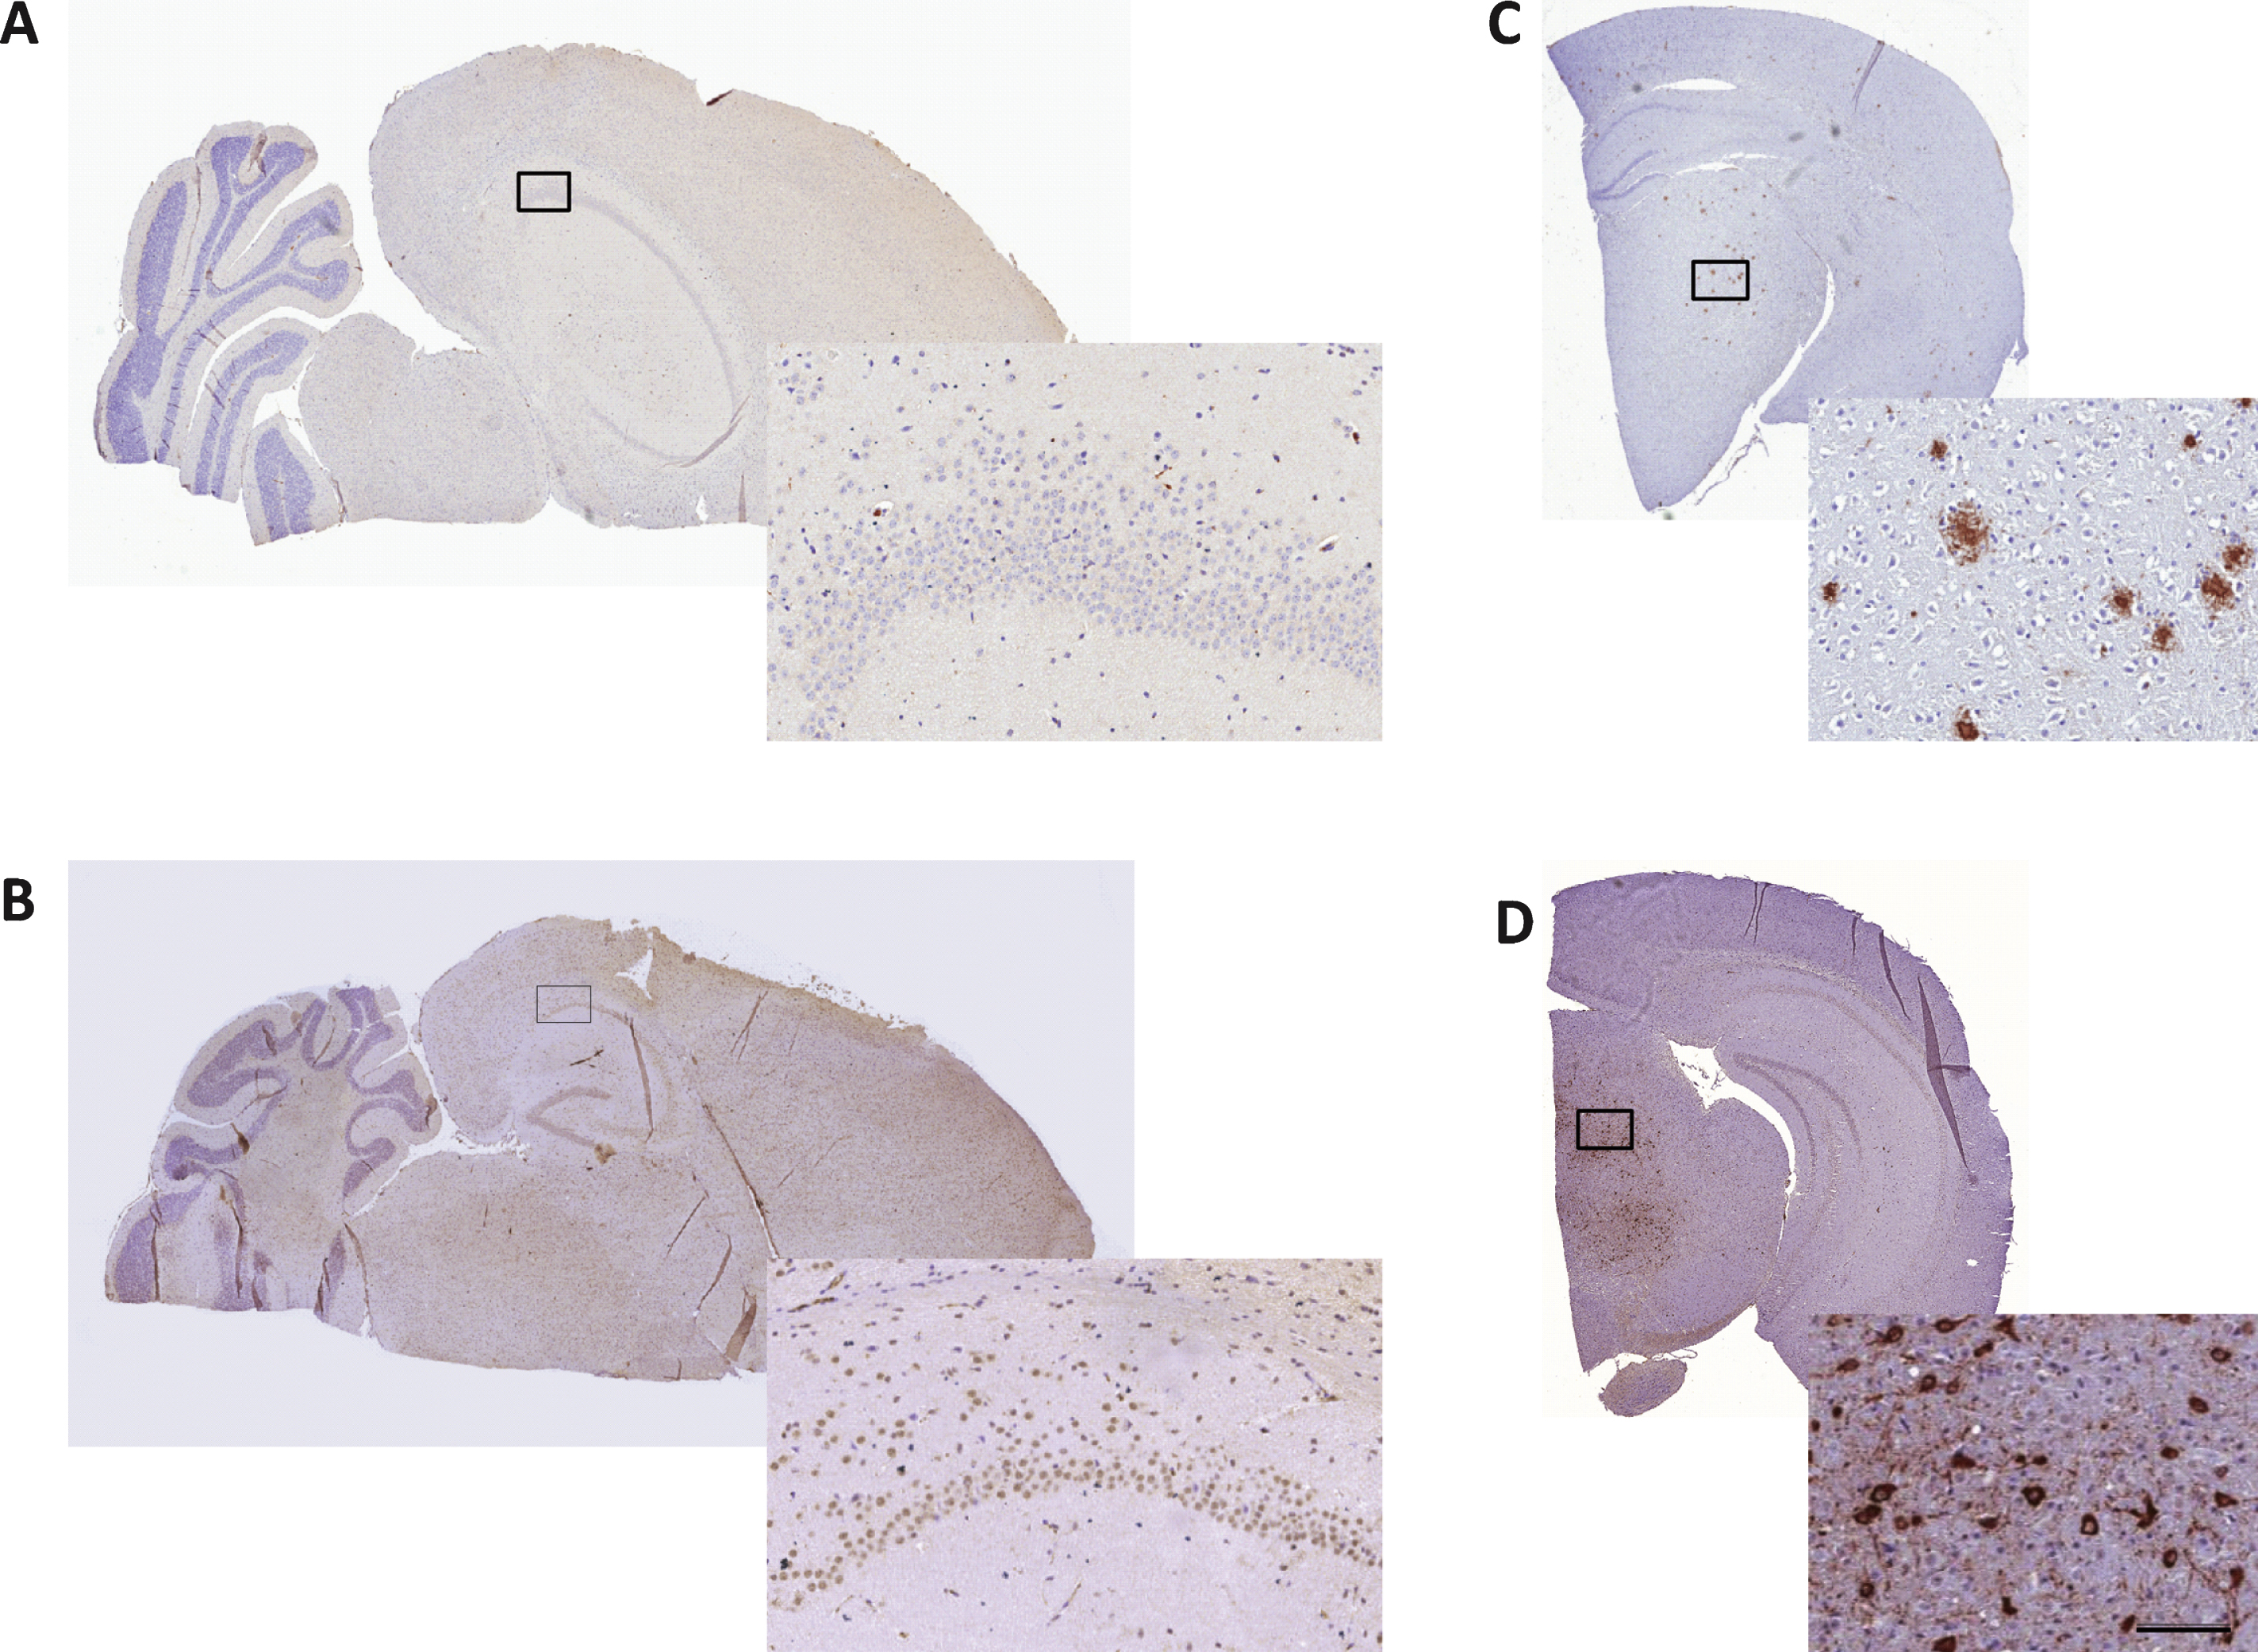 Immunohistochemical analysis of Aβ and neurofibrillary tangles in SAMP8 mouse brains. 10-month-old SAMP8 mice showed no presence of amyloid plaques or neurofibrillary tangles. Representative photomicrographs of Aβ (A) and phospho-tau (B) immunohistochemical staining of 5- μm thick brain sections from 10-month-old SAMP8 mice. Immunohistochemical control samples for amyloid plaques (C, AβPP/PS1 mouse) and neurofibrillary tangles (D, hTau P301L mouse) are inserted. Enlarged photos represent corresponding framed area on each specimen (scale bar = 100 μm).